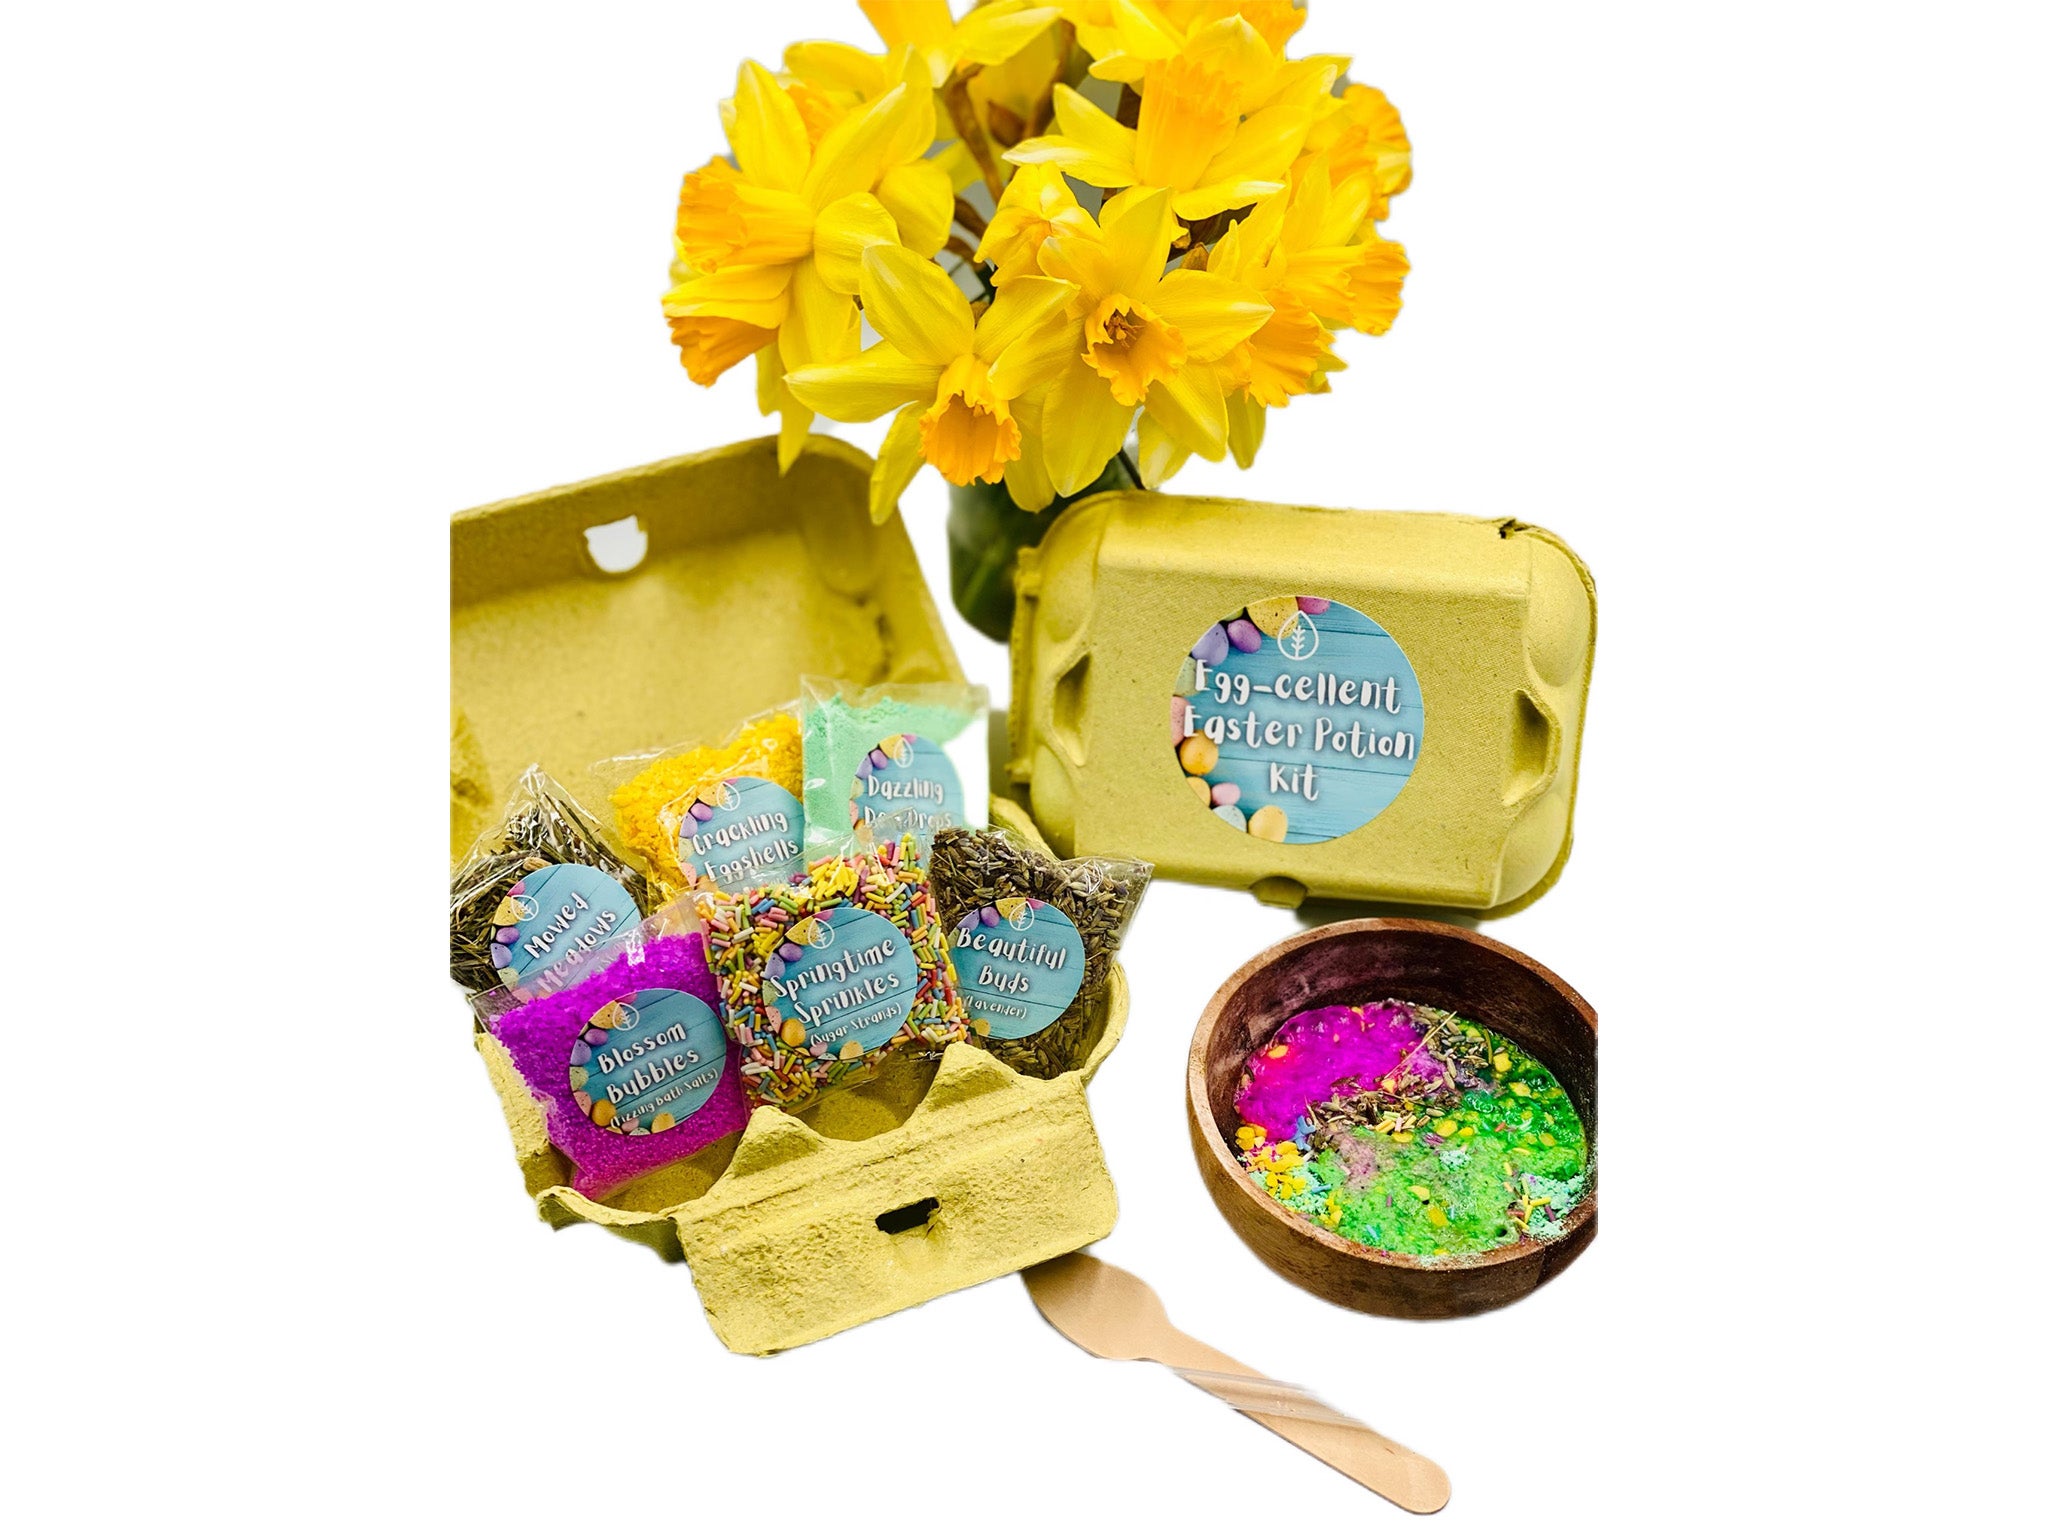 Youth and Wild egg-cellent Easter potion kit